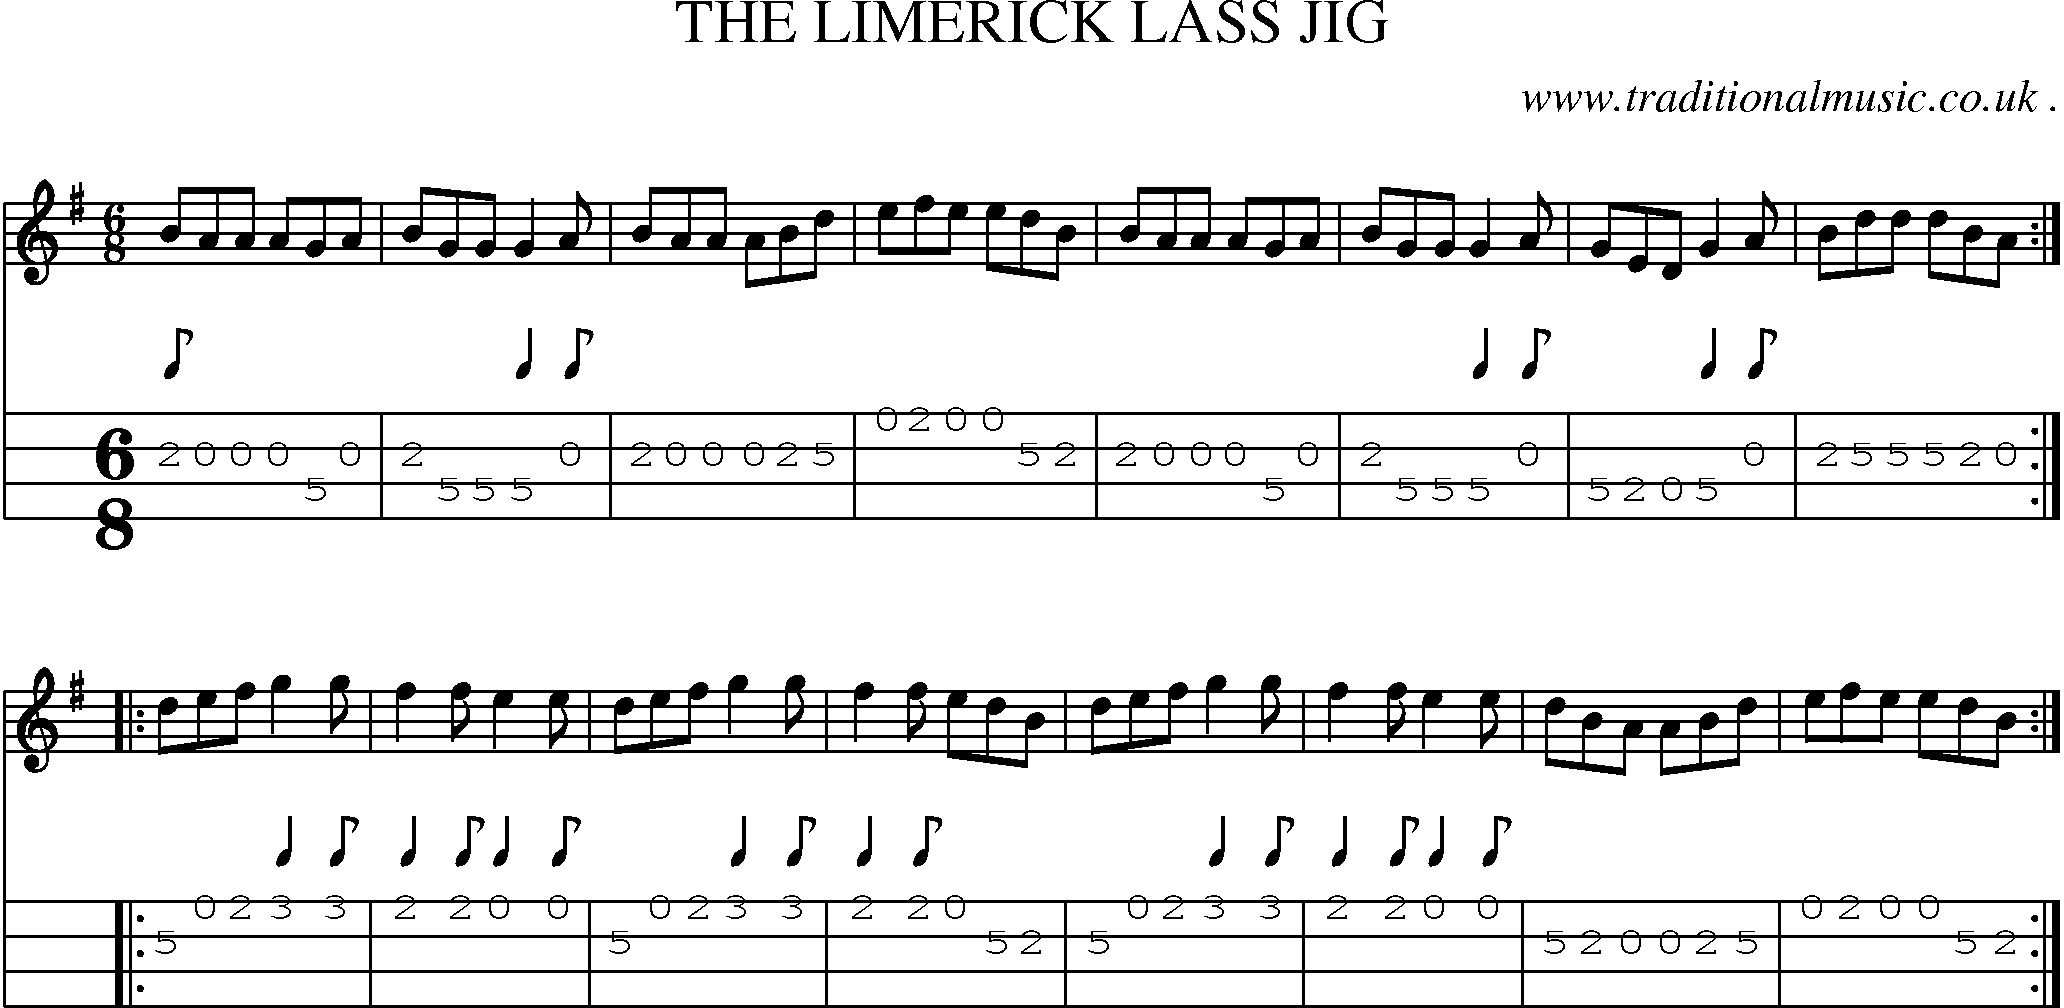 Sheet-Music and Mandolin Tabs for The Limerick Lass Jig